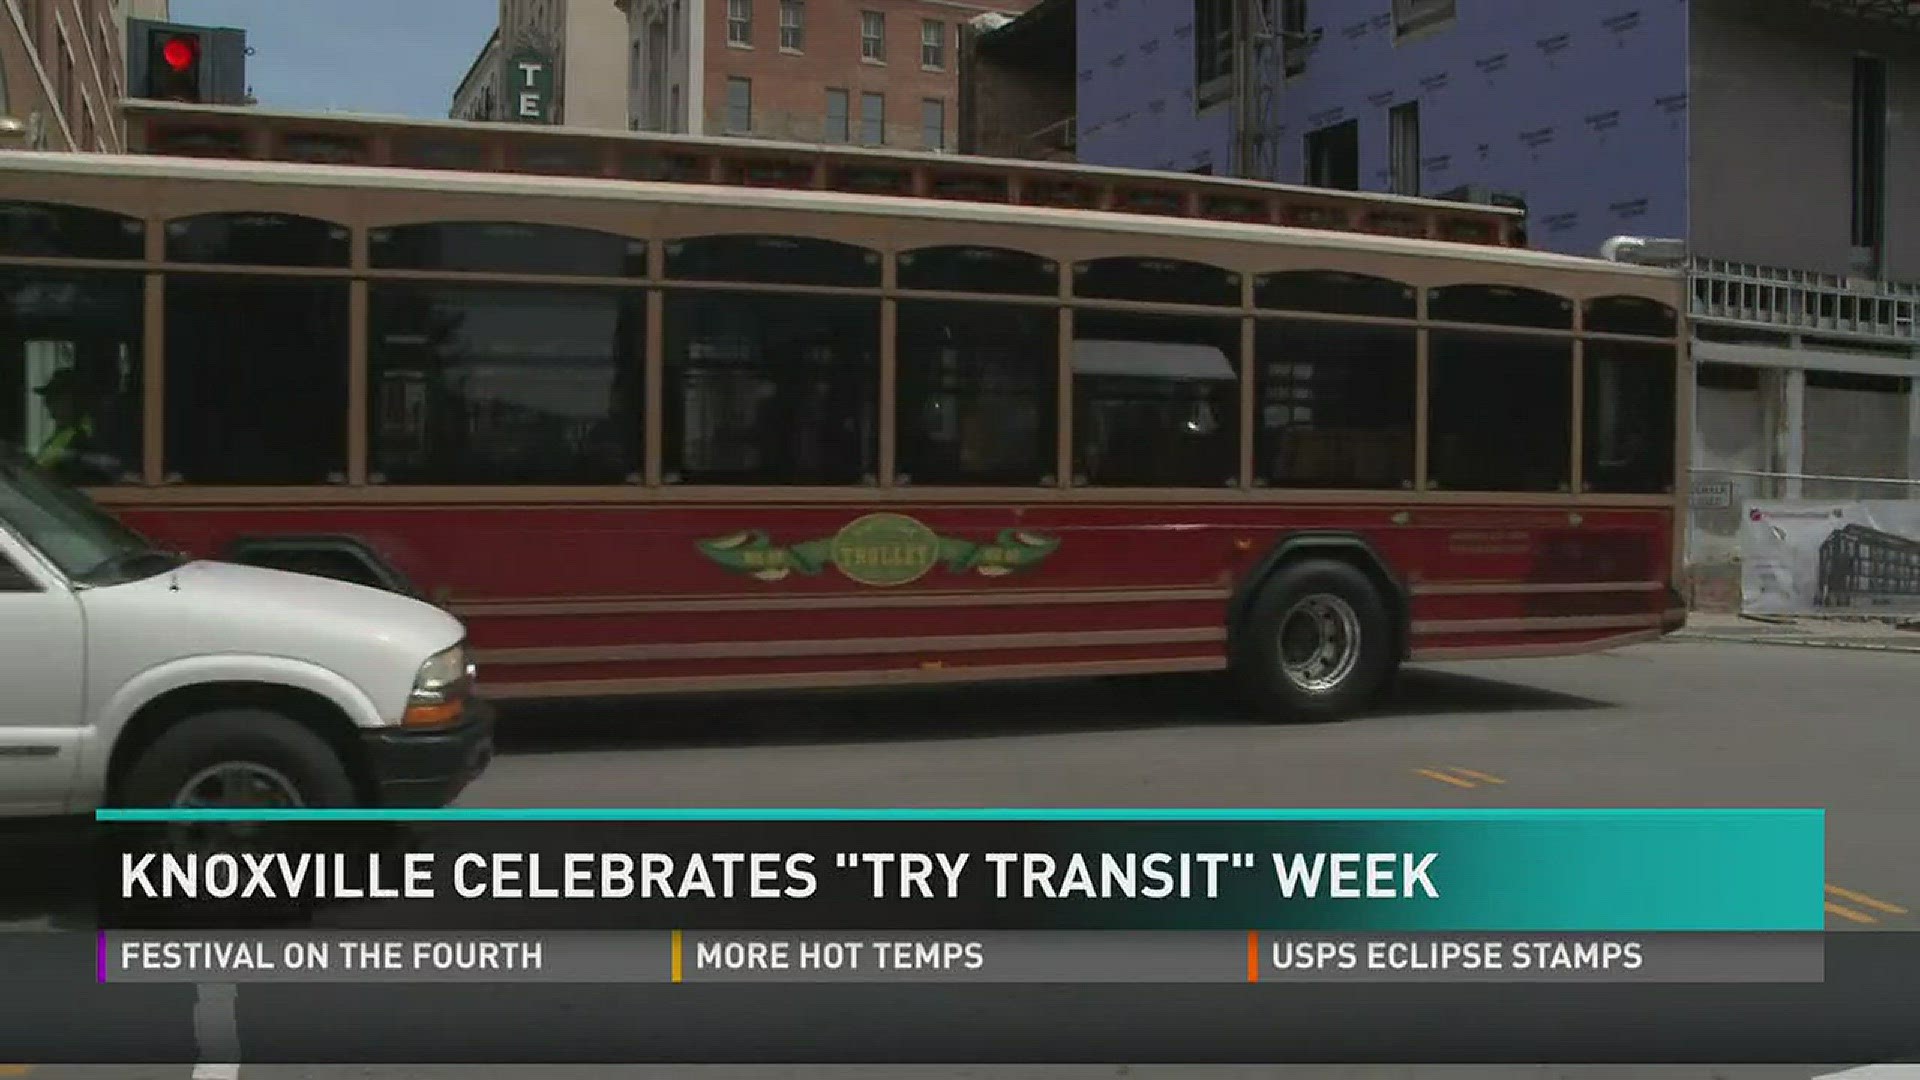 To encourage people to try Knoxville's mass transit options, the city hid prizes aboard downtown trolleys